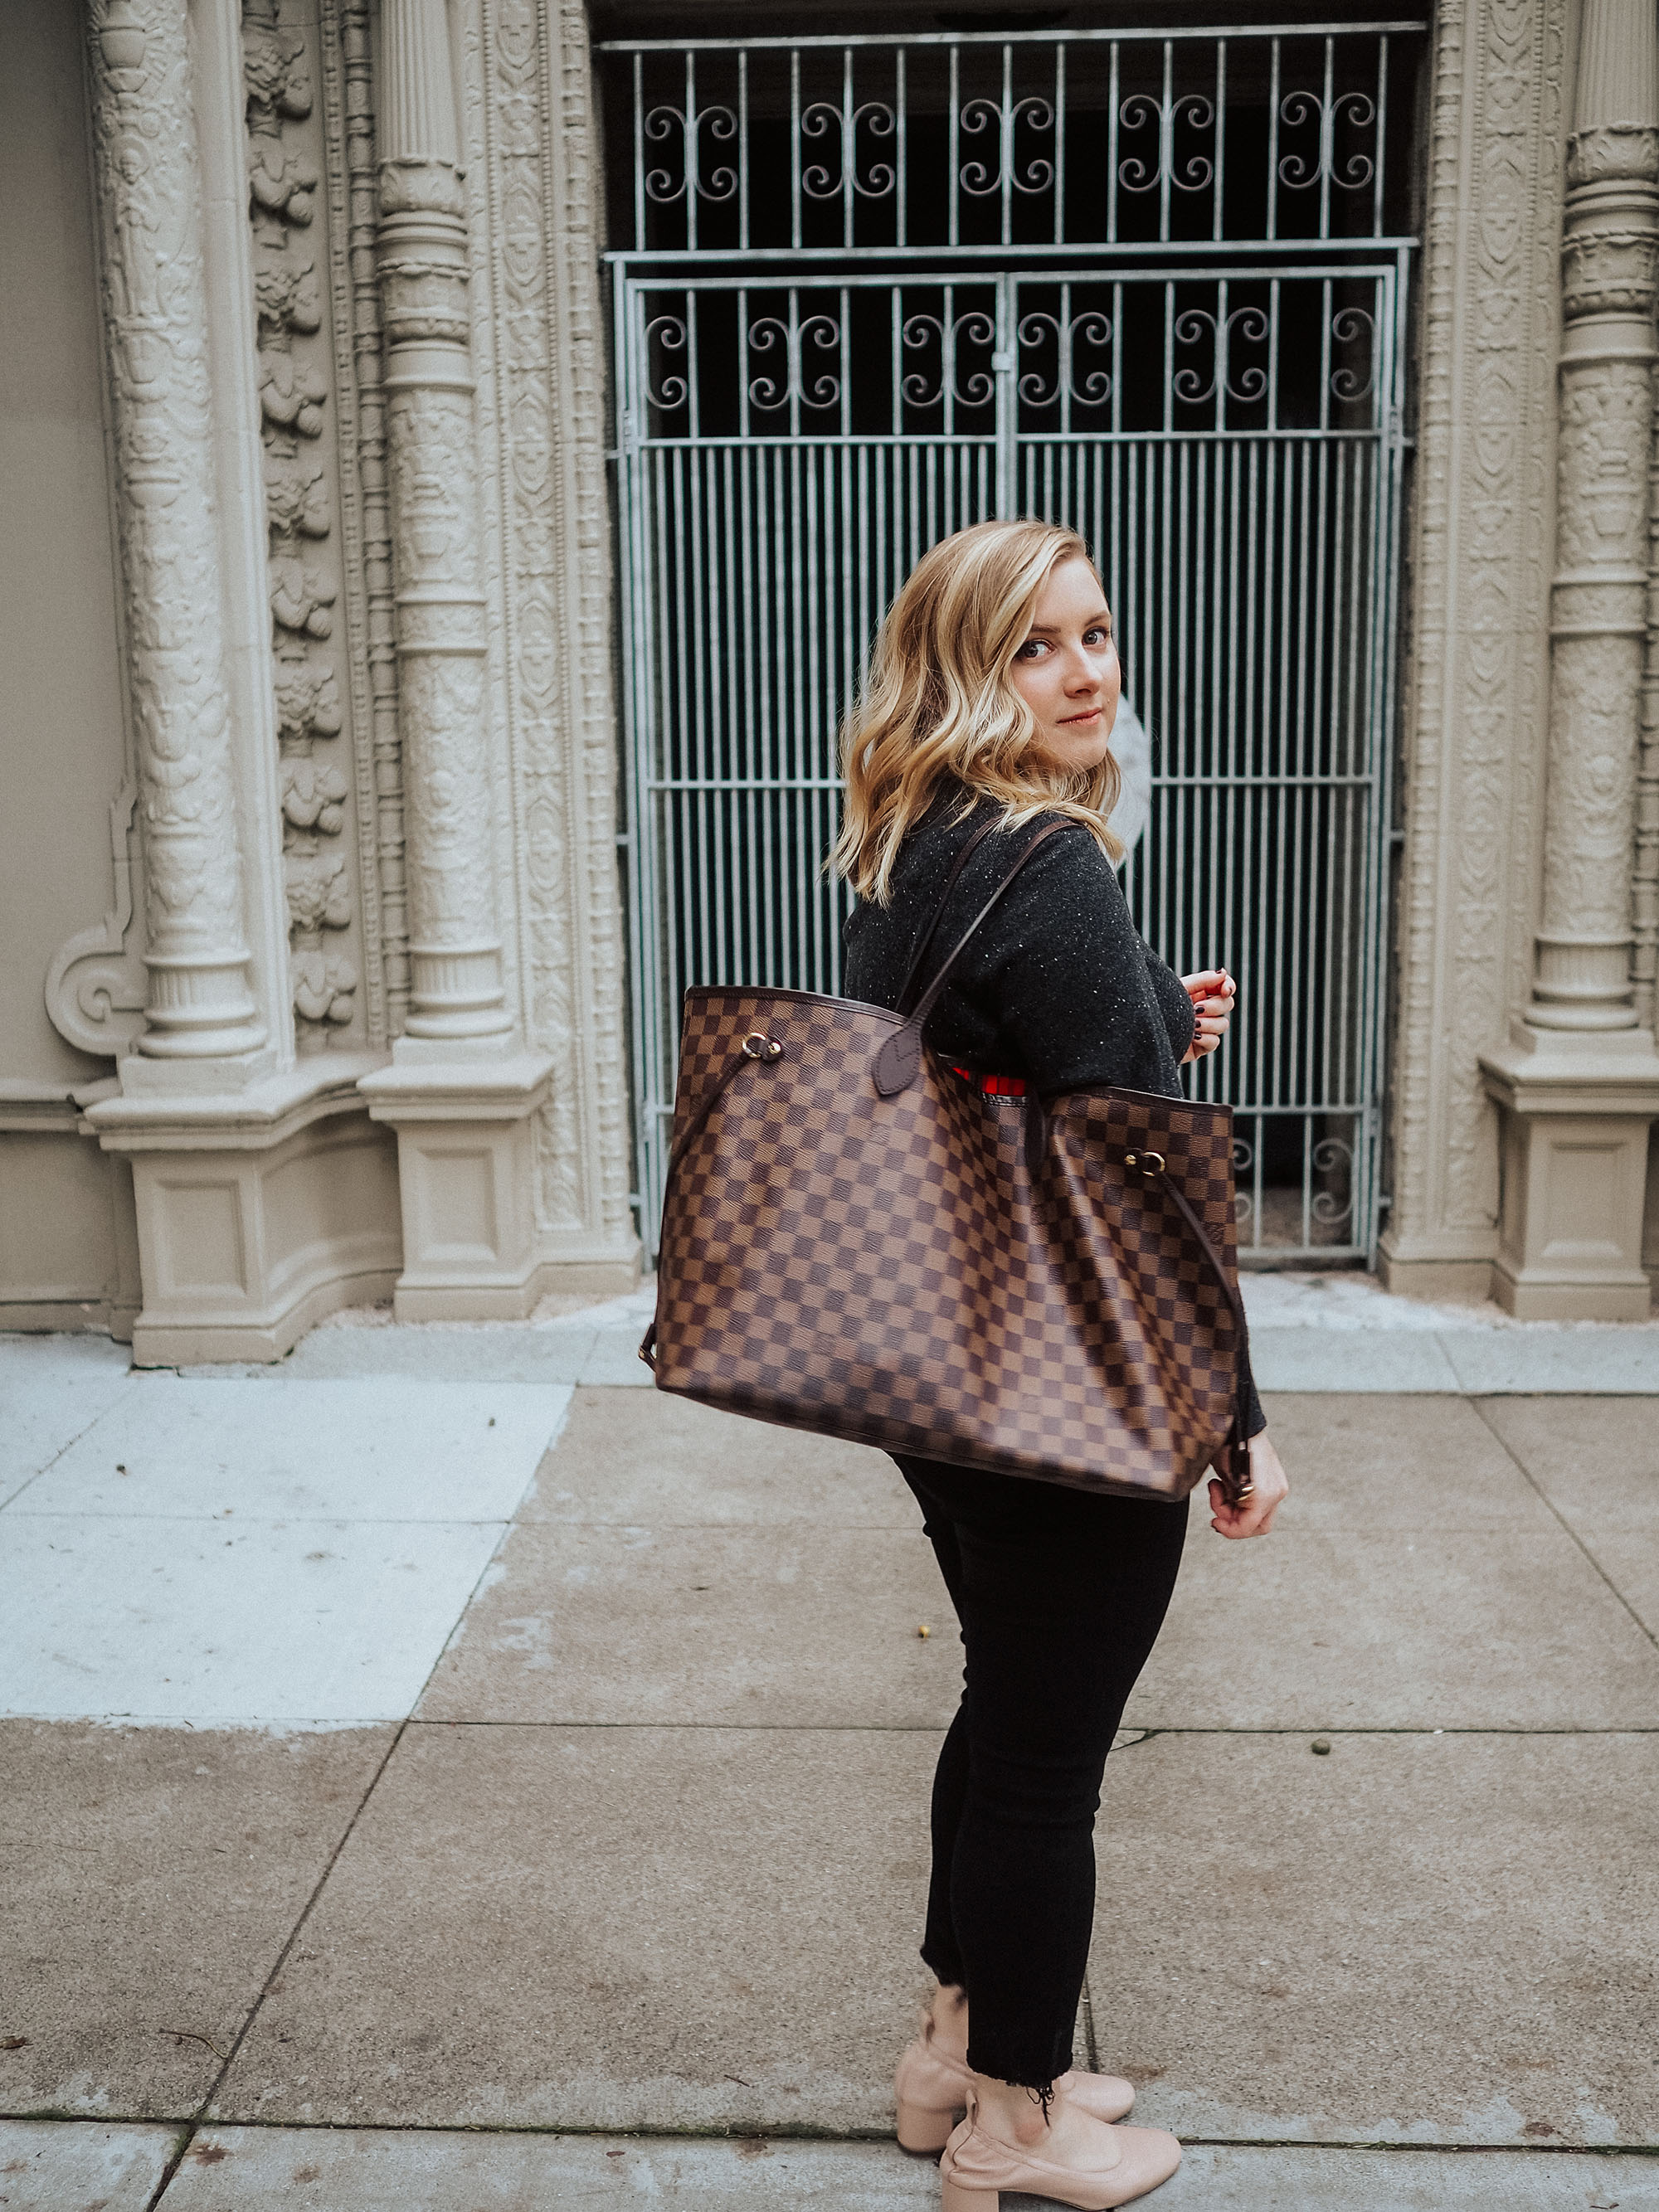 Curious what it's like to buy a used designer handbag on Fashionphile? Check out all the pros and cons of Fashionphile in this Fashionphile review!